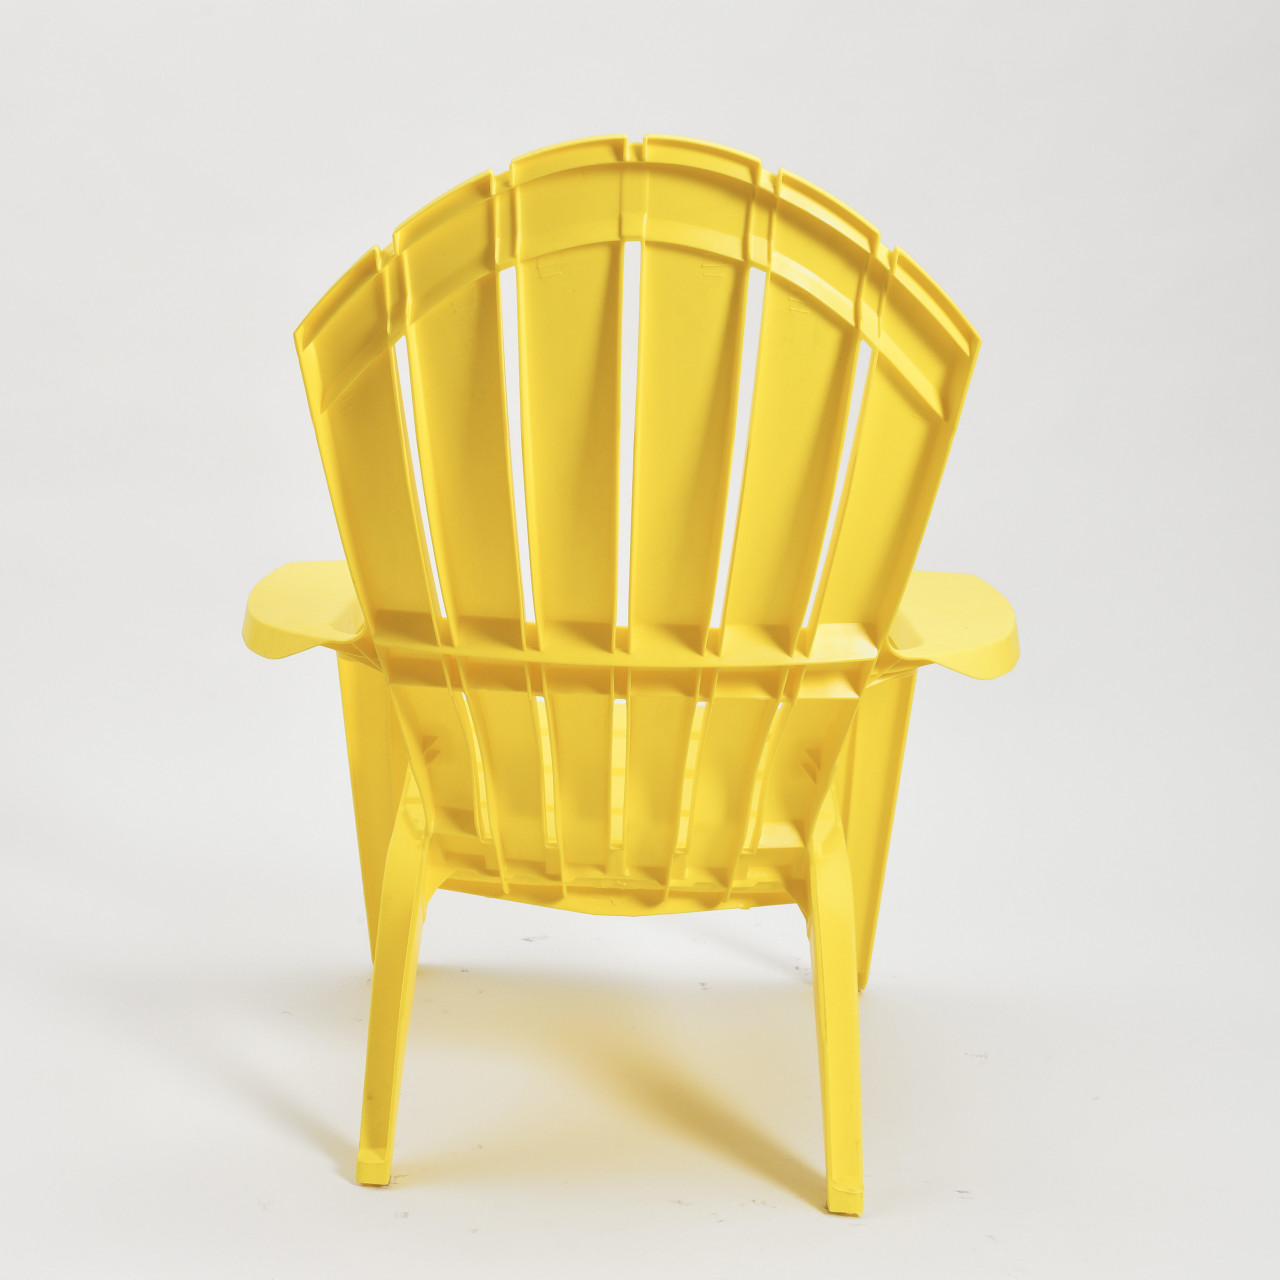 Yellow Plastic Adirondack Chair Tables Chairs Displays Products A Leading Supplier Of Promotional Products To The Advertising Specialty Industry